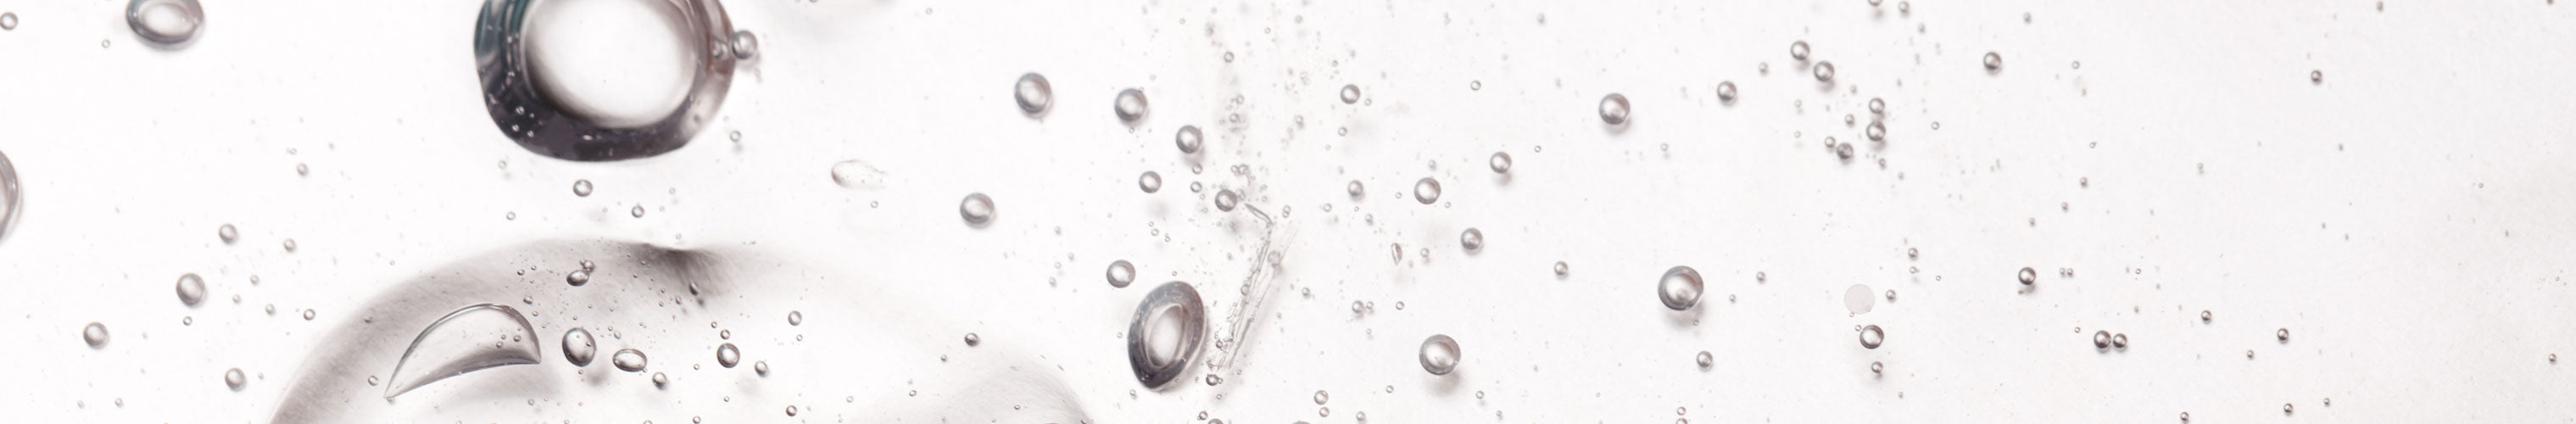 close up of clear liquid with bubbles